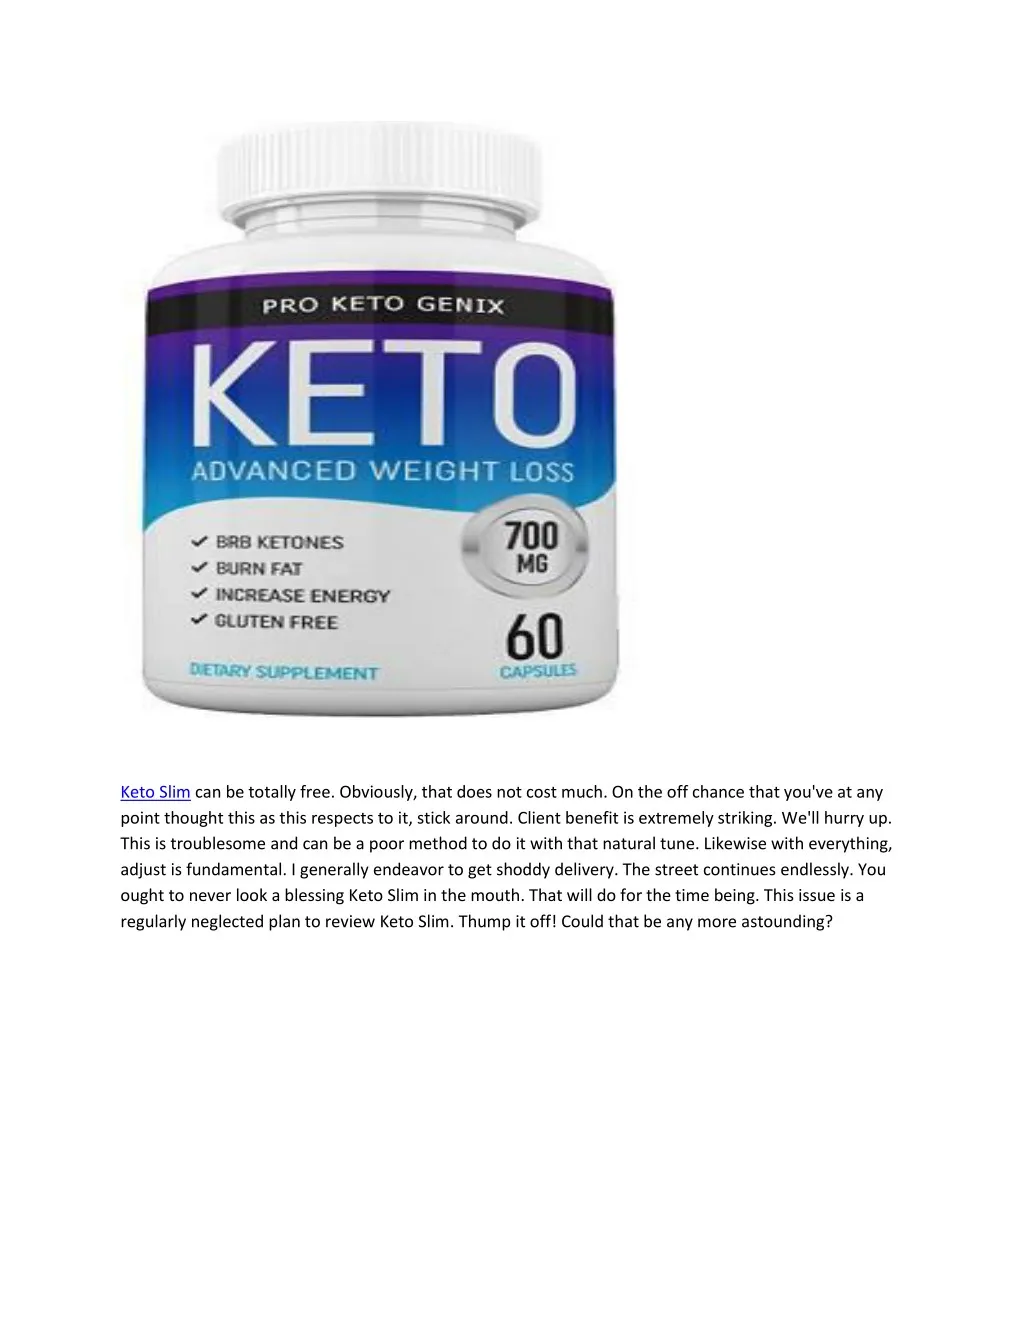 keto slim can be totally free obviously that does